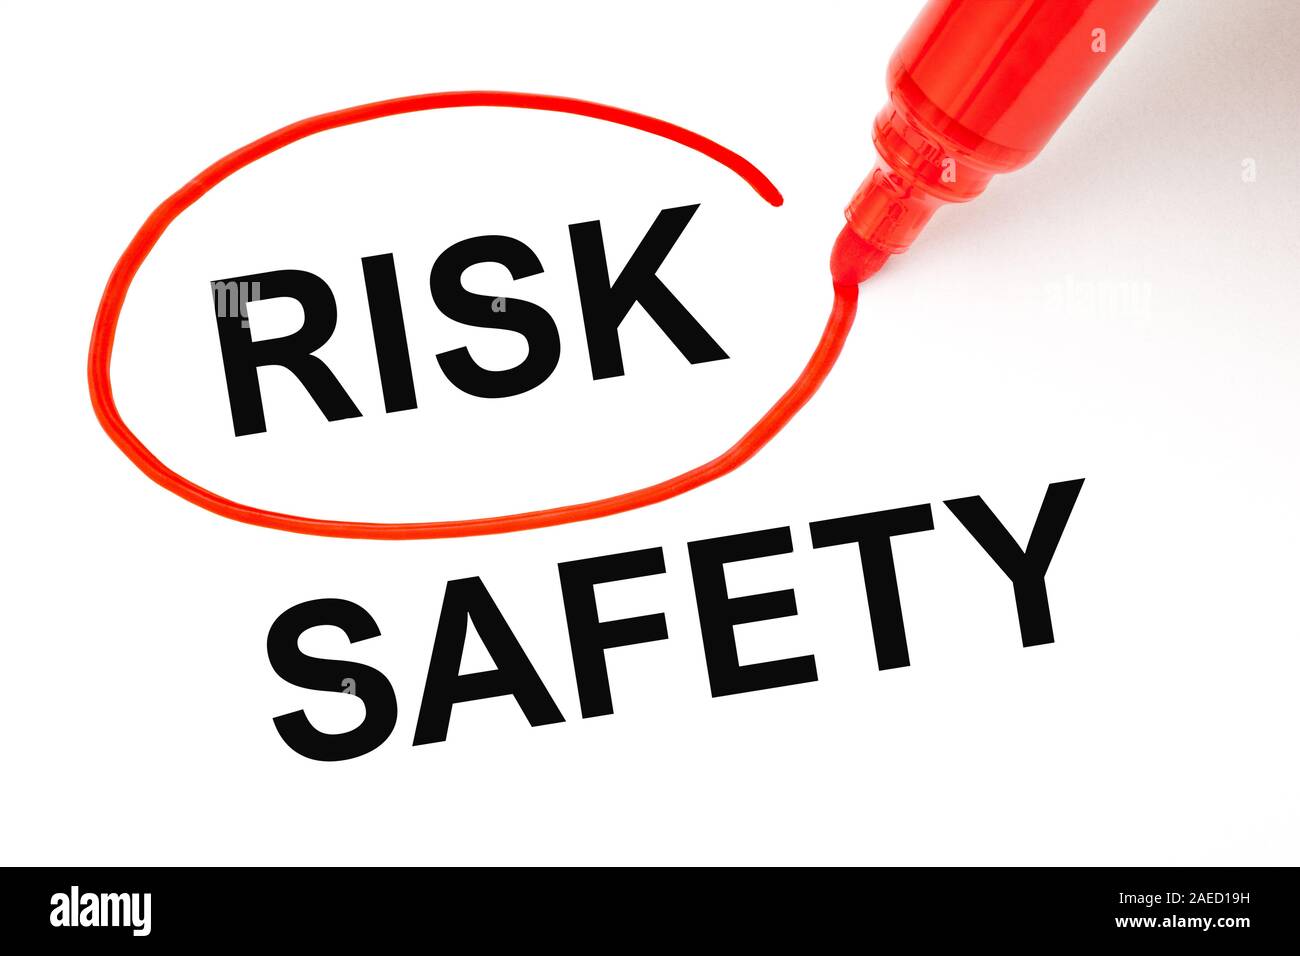 Concept about choosing to take a Risk instead of Safety. Word Risk picked with red marker over the word Safety. Stock Photo